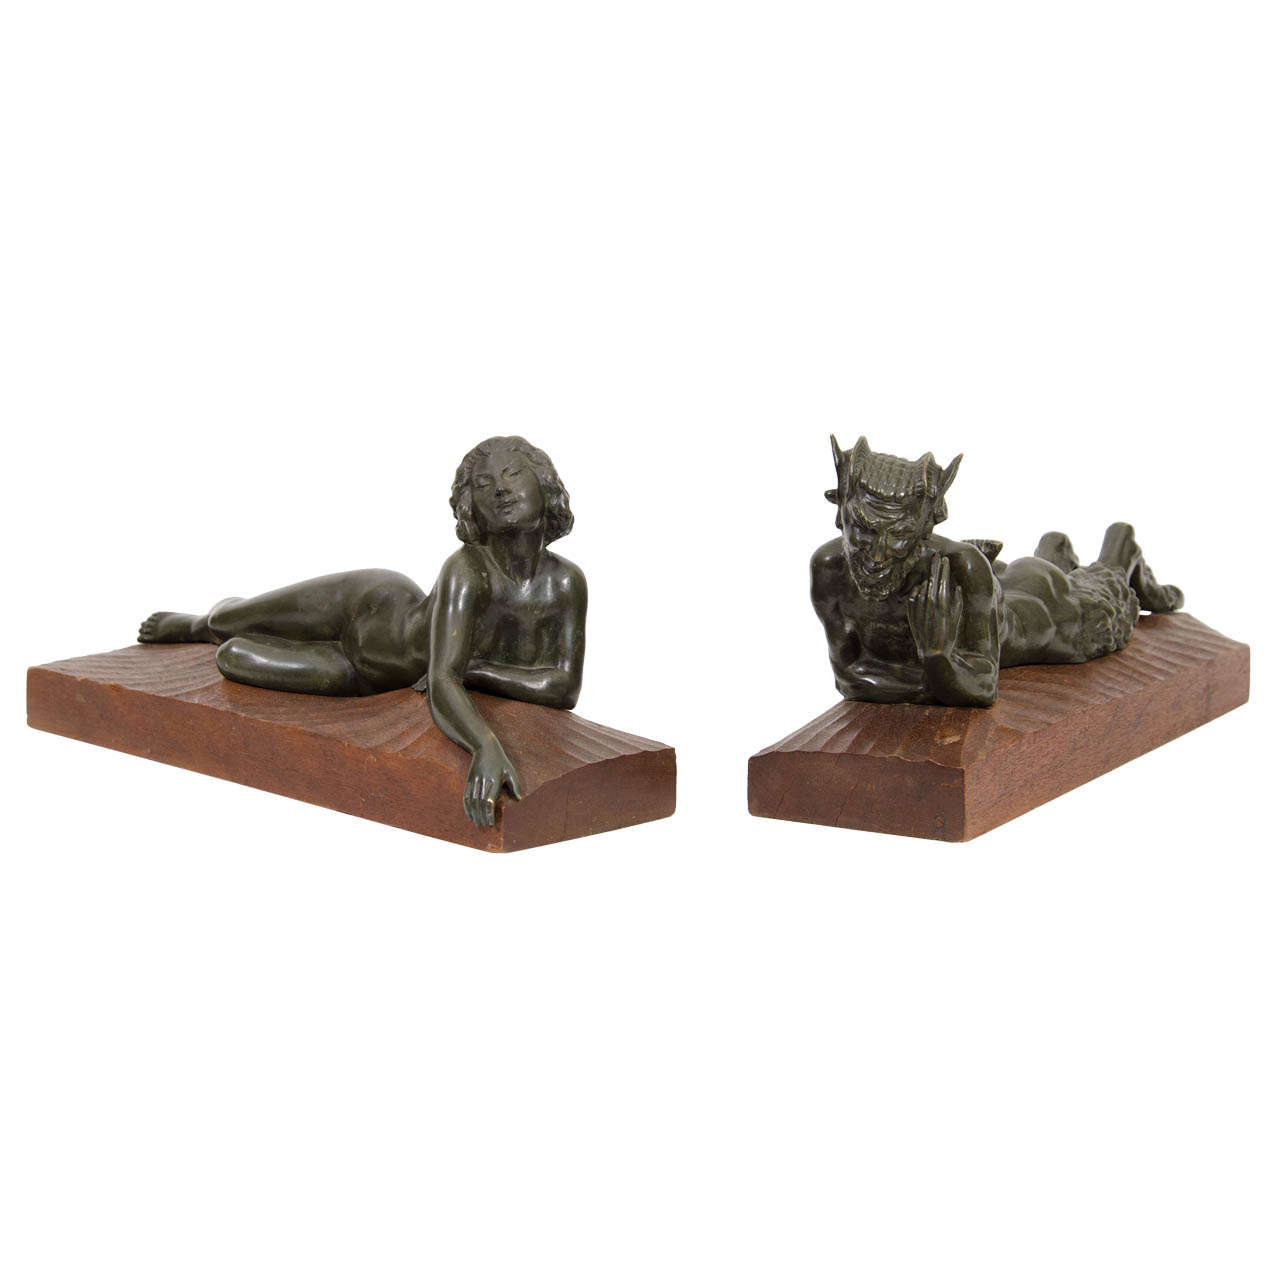 An Art Deco Pair of Bronze Sculptures of "Pan and Lover"